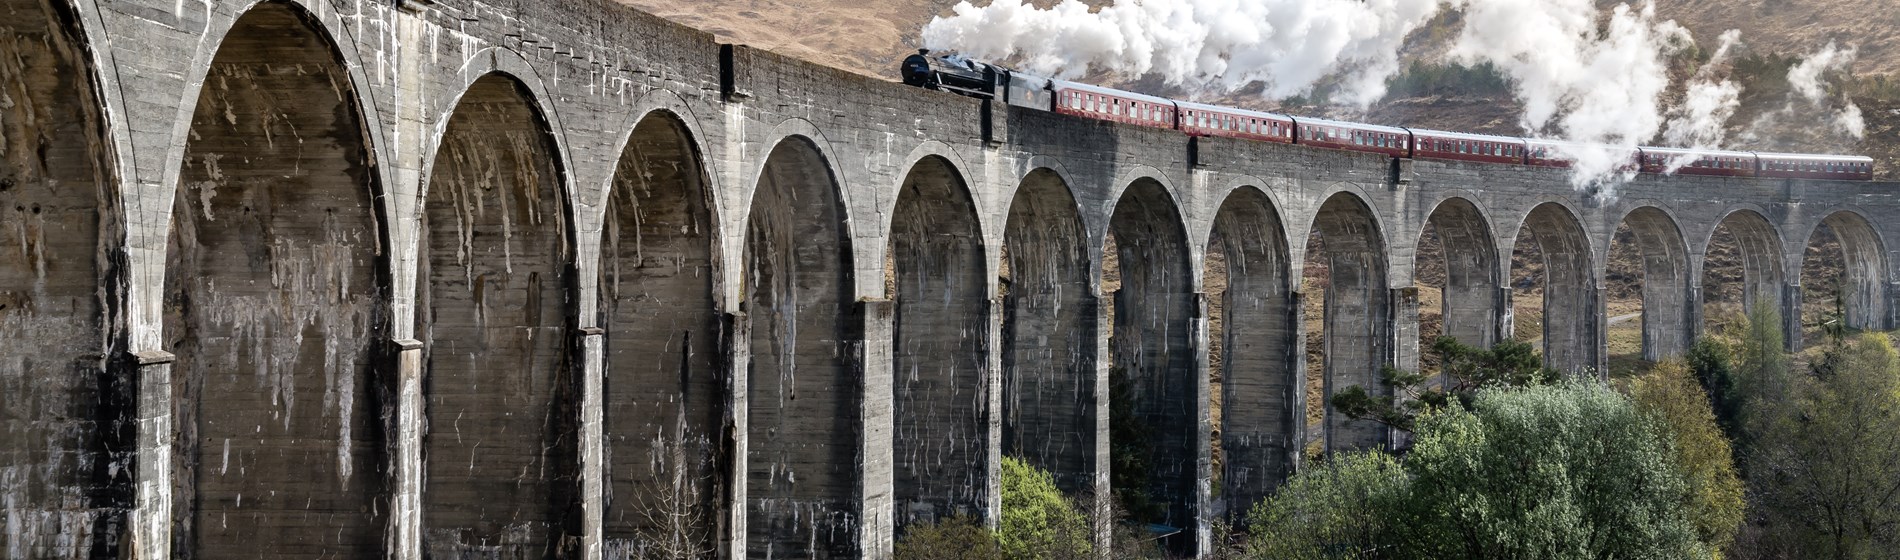 A viaduct in scotland with a steam train